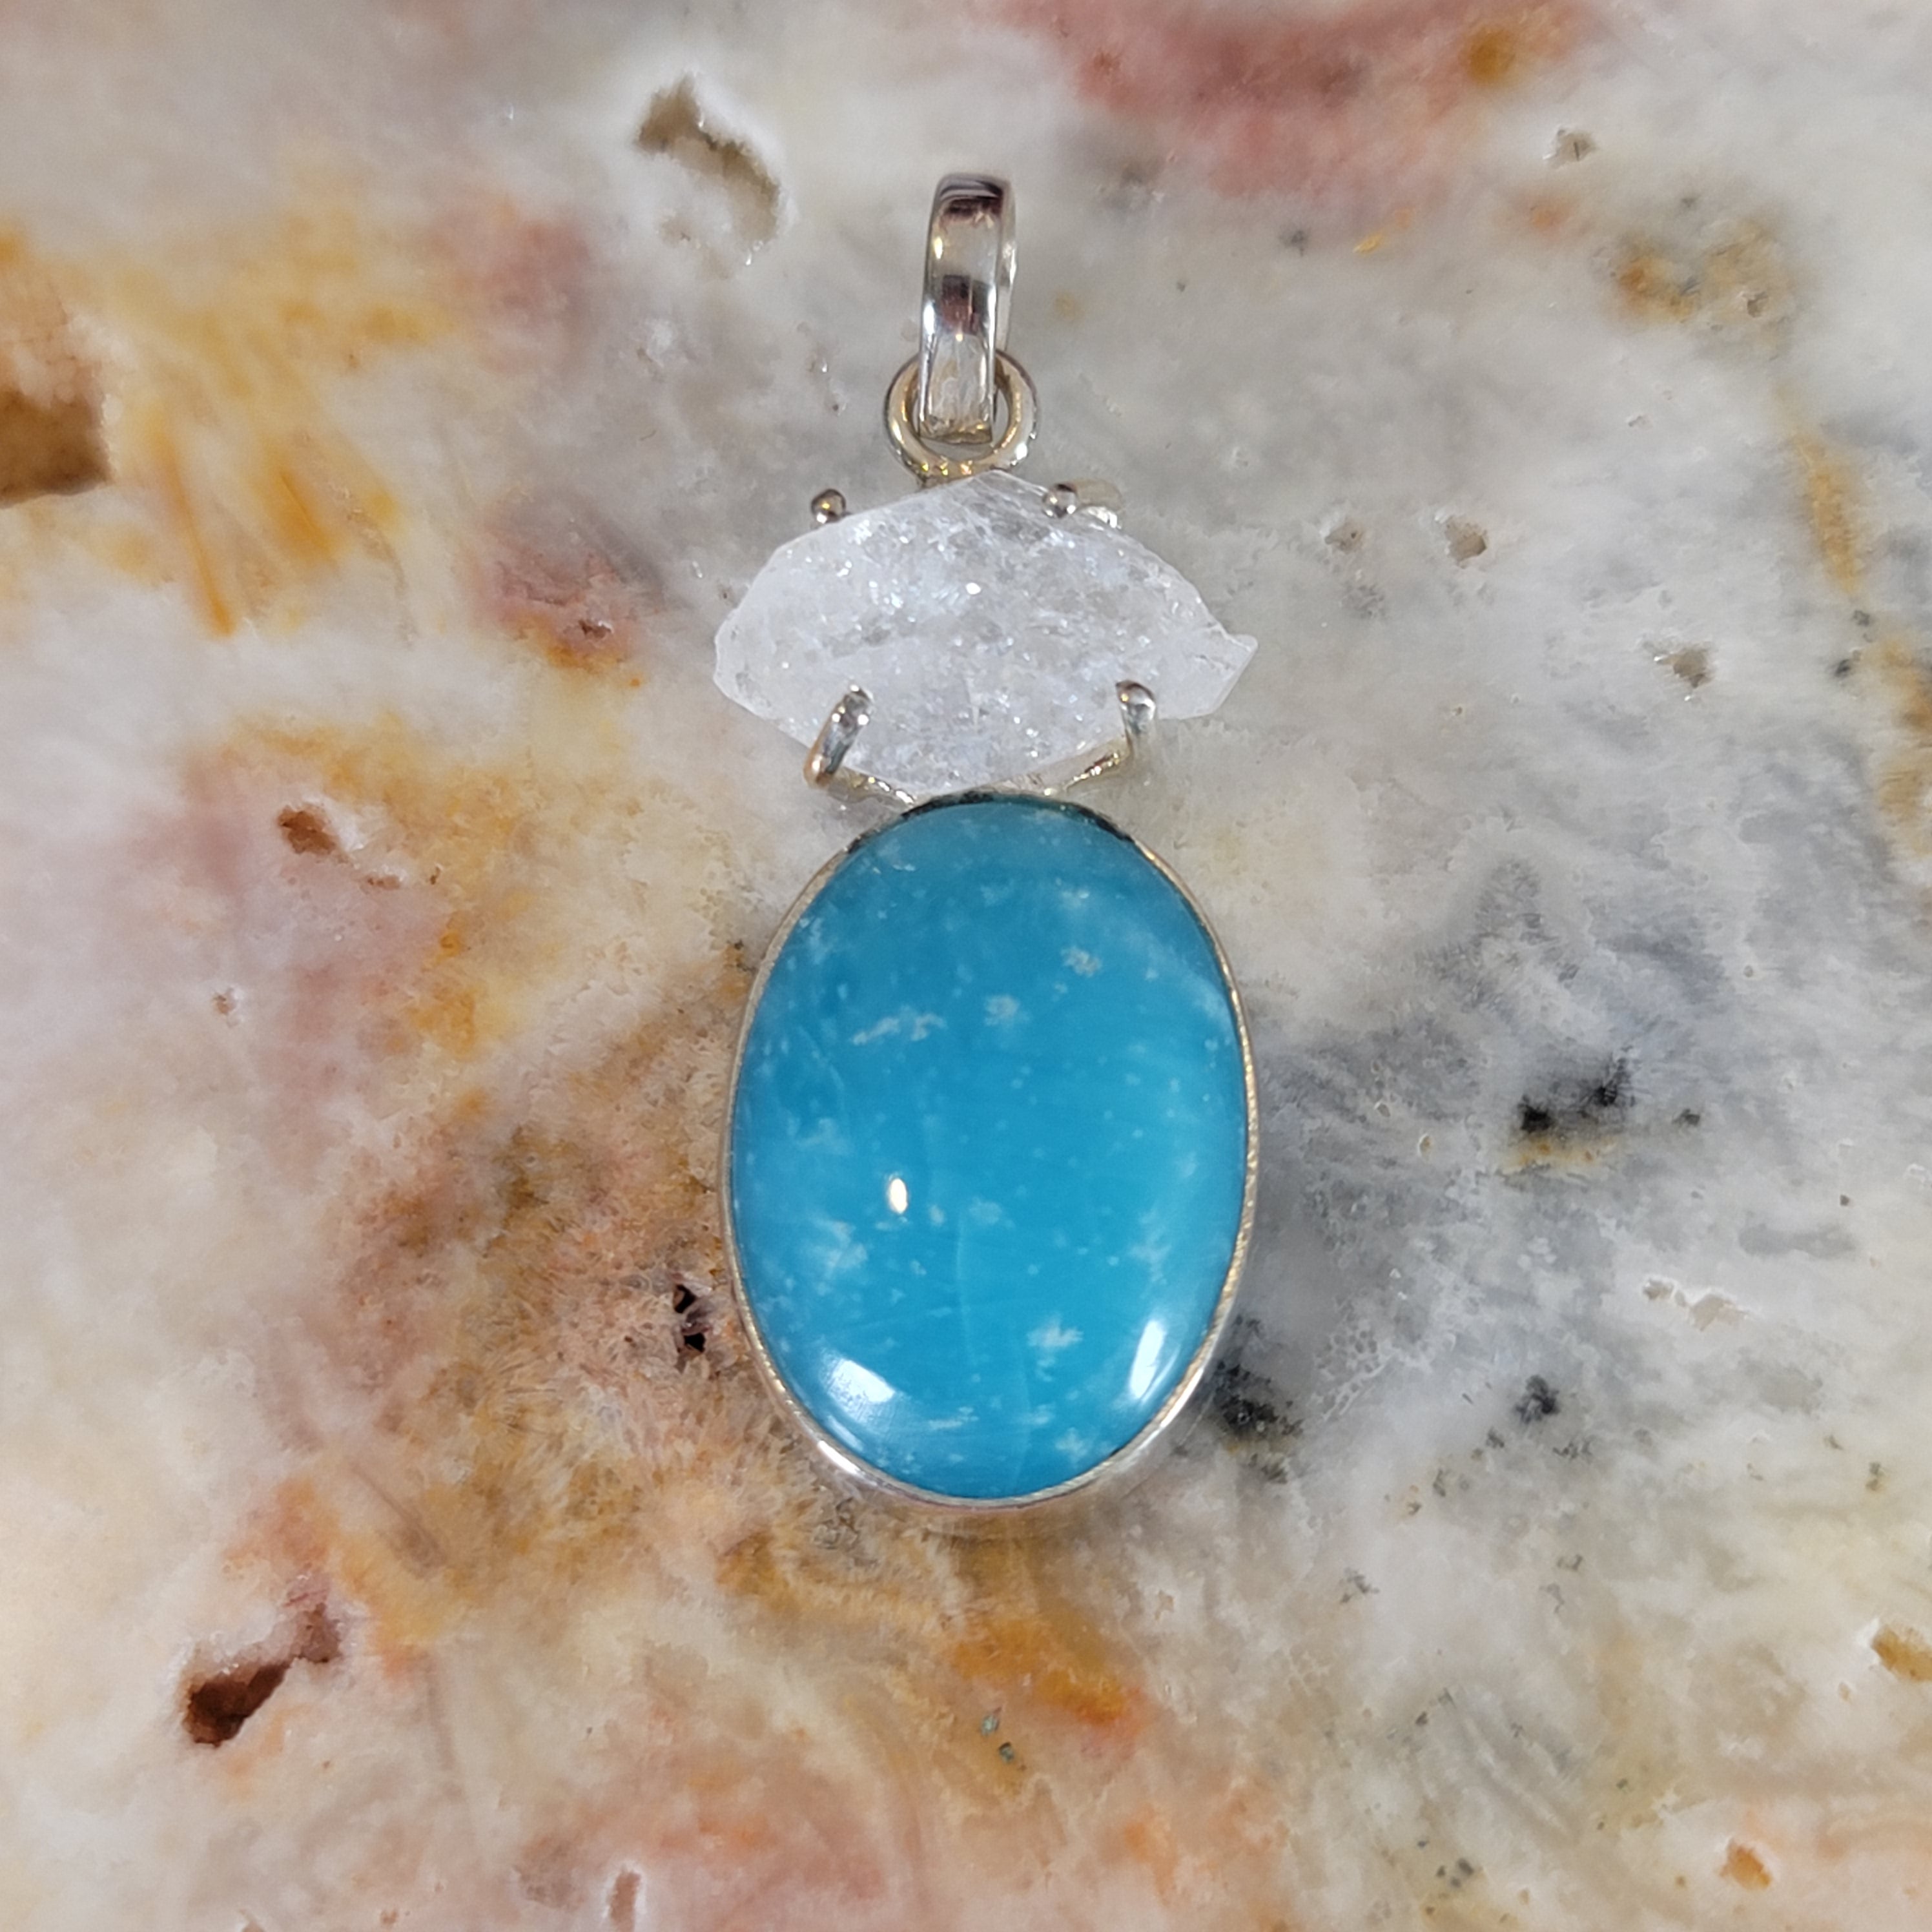 Blue Smithsonite Pendant .925 Silver for Clarity and Guidance